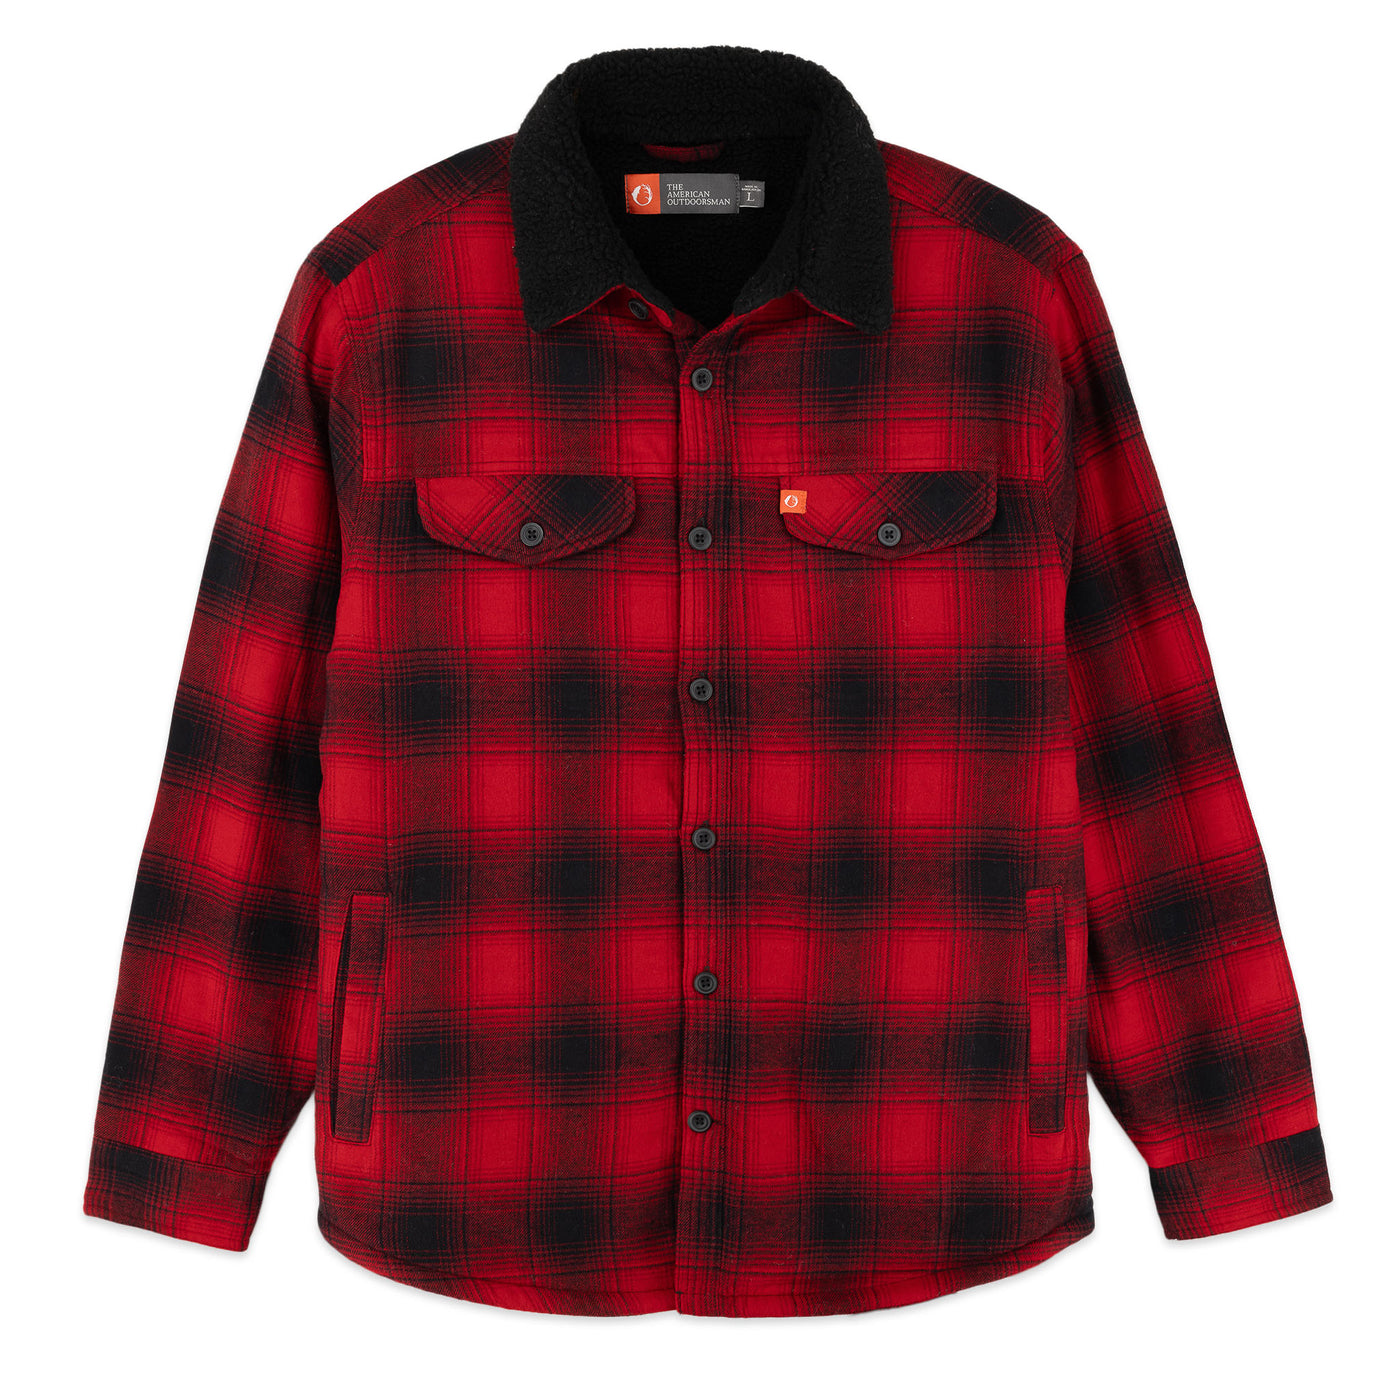 Flannel Shirt Jacket with Sherpa Fleece Lining & Collar – The